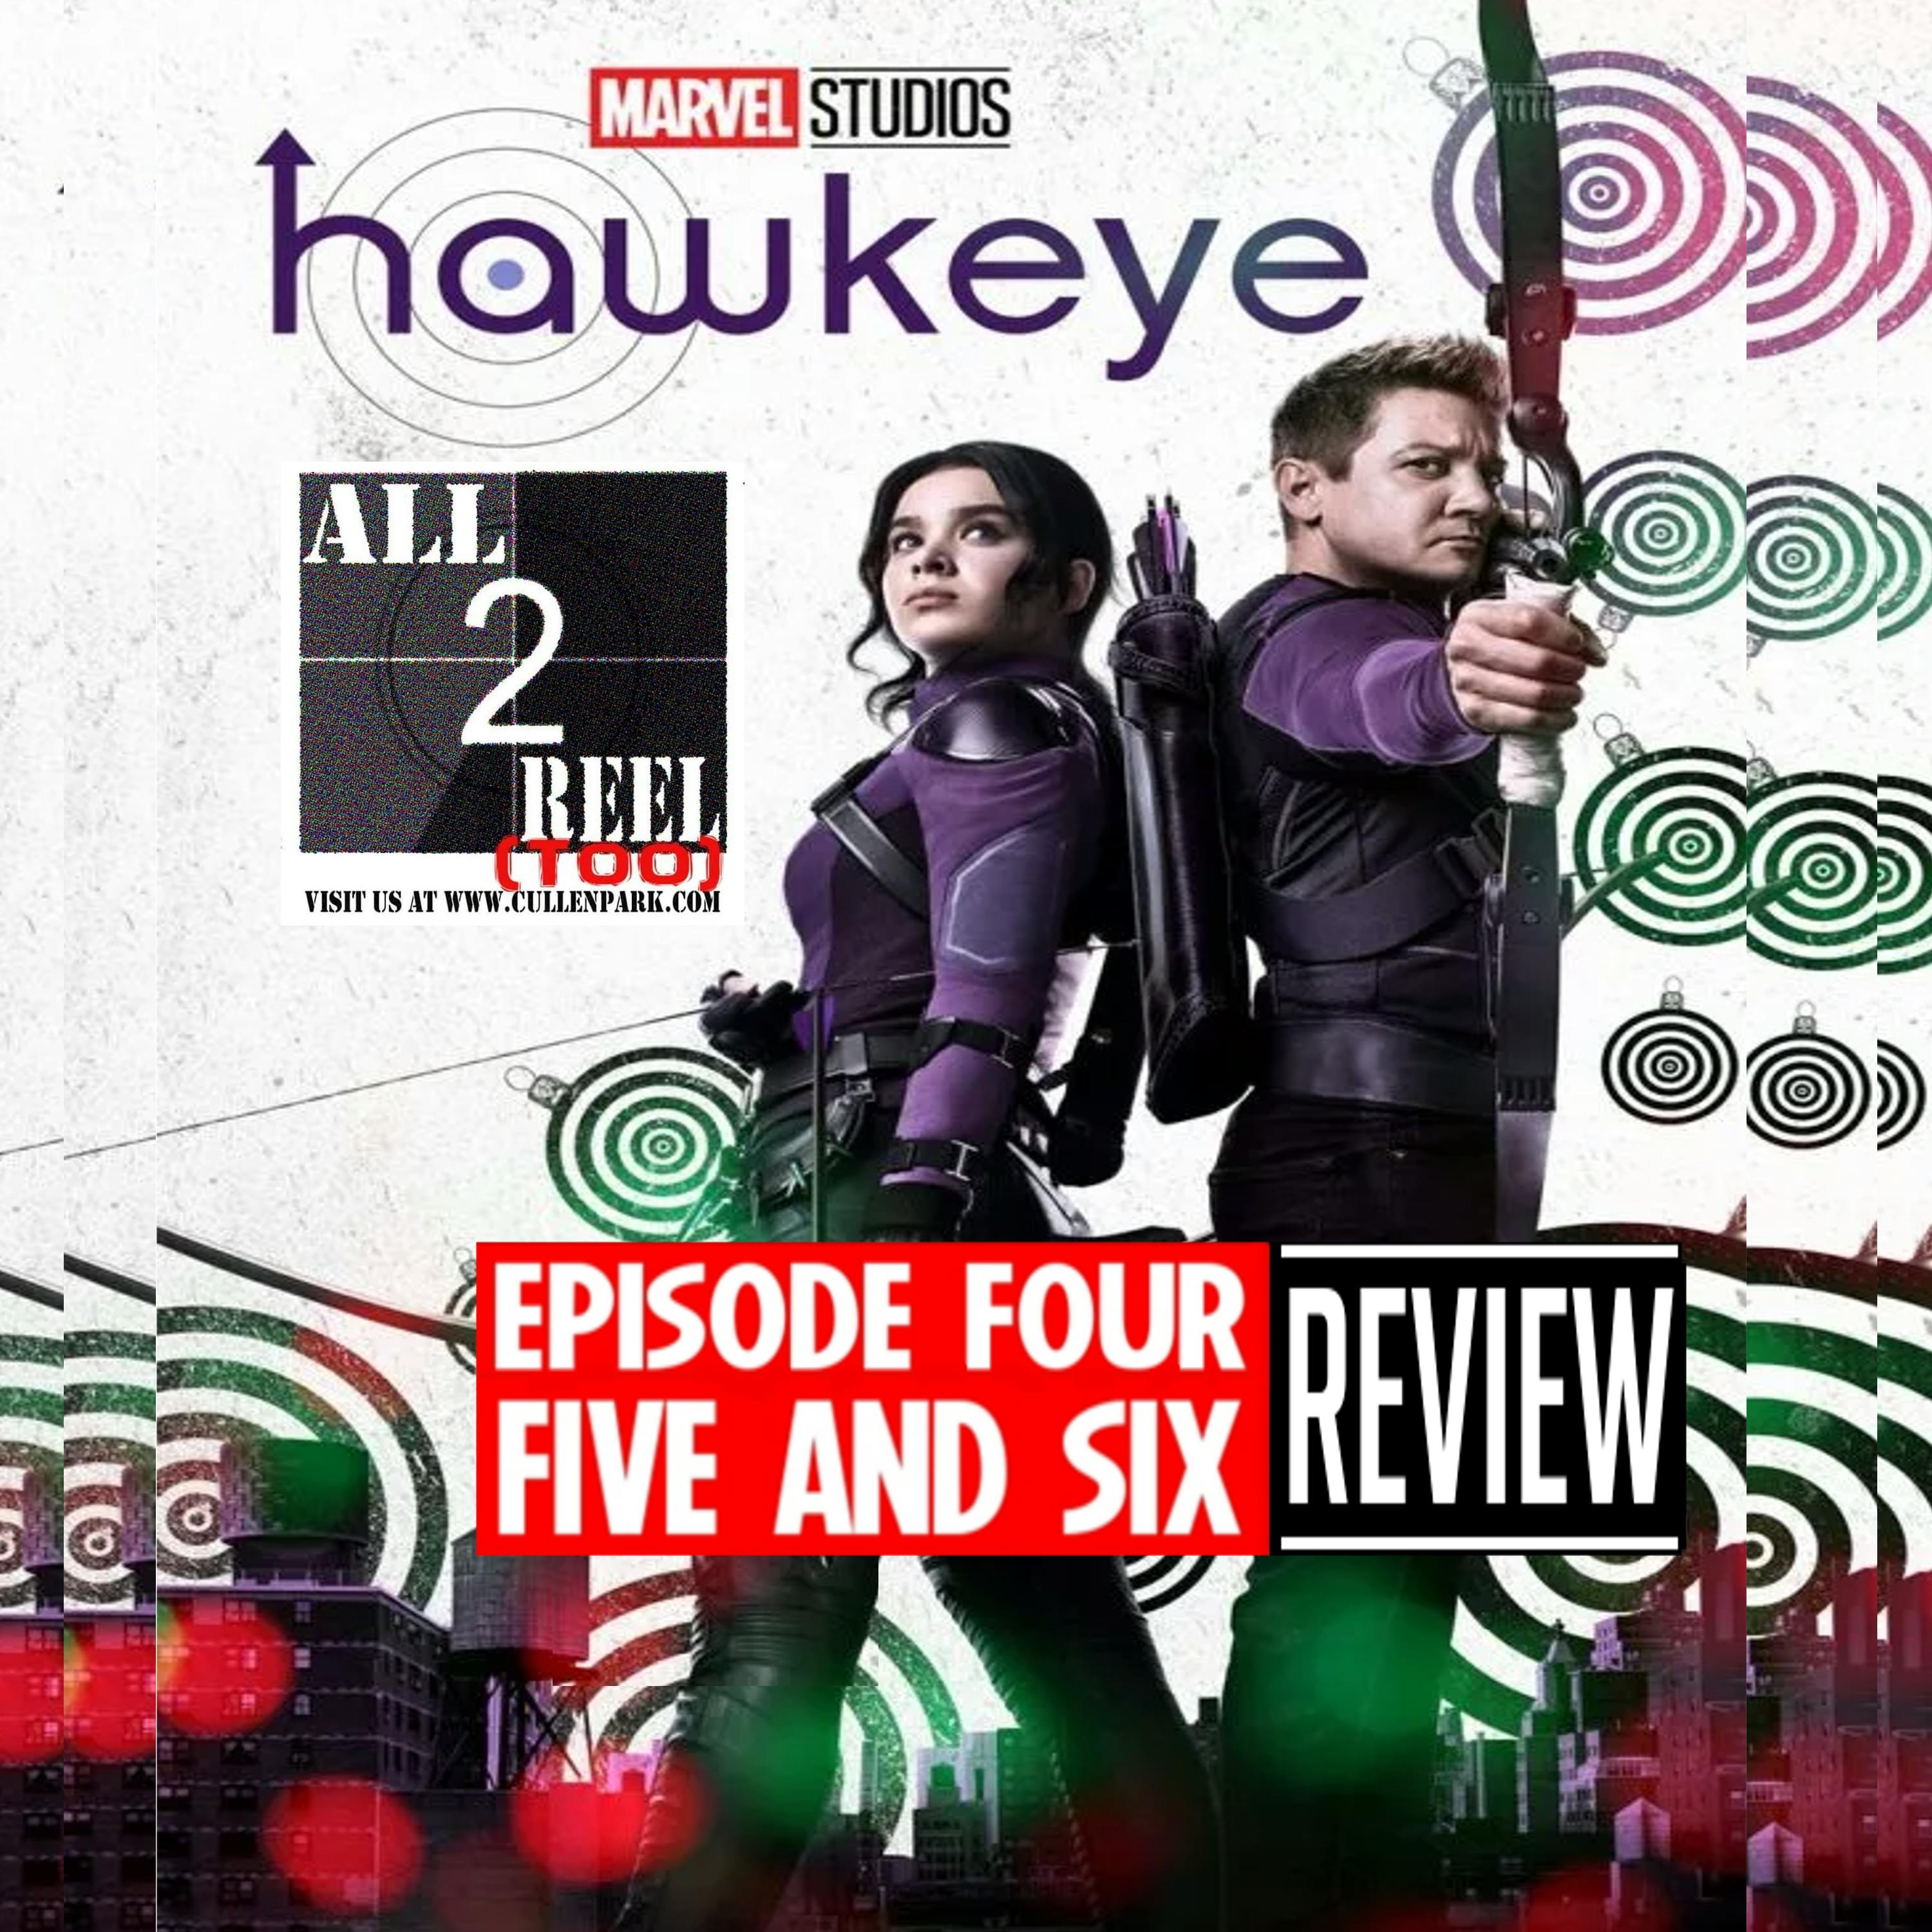 HAWKEYE EPISODE 4, 5 AND 6 REVIEW